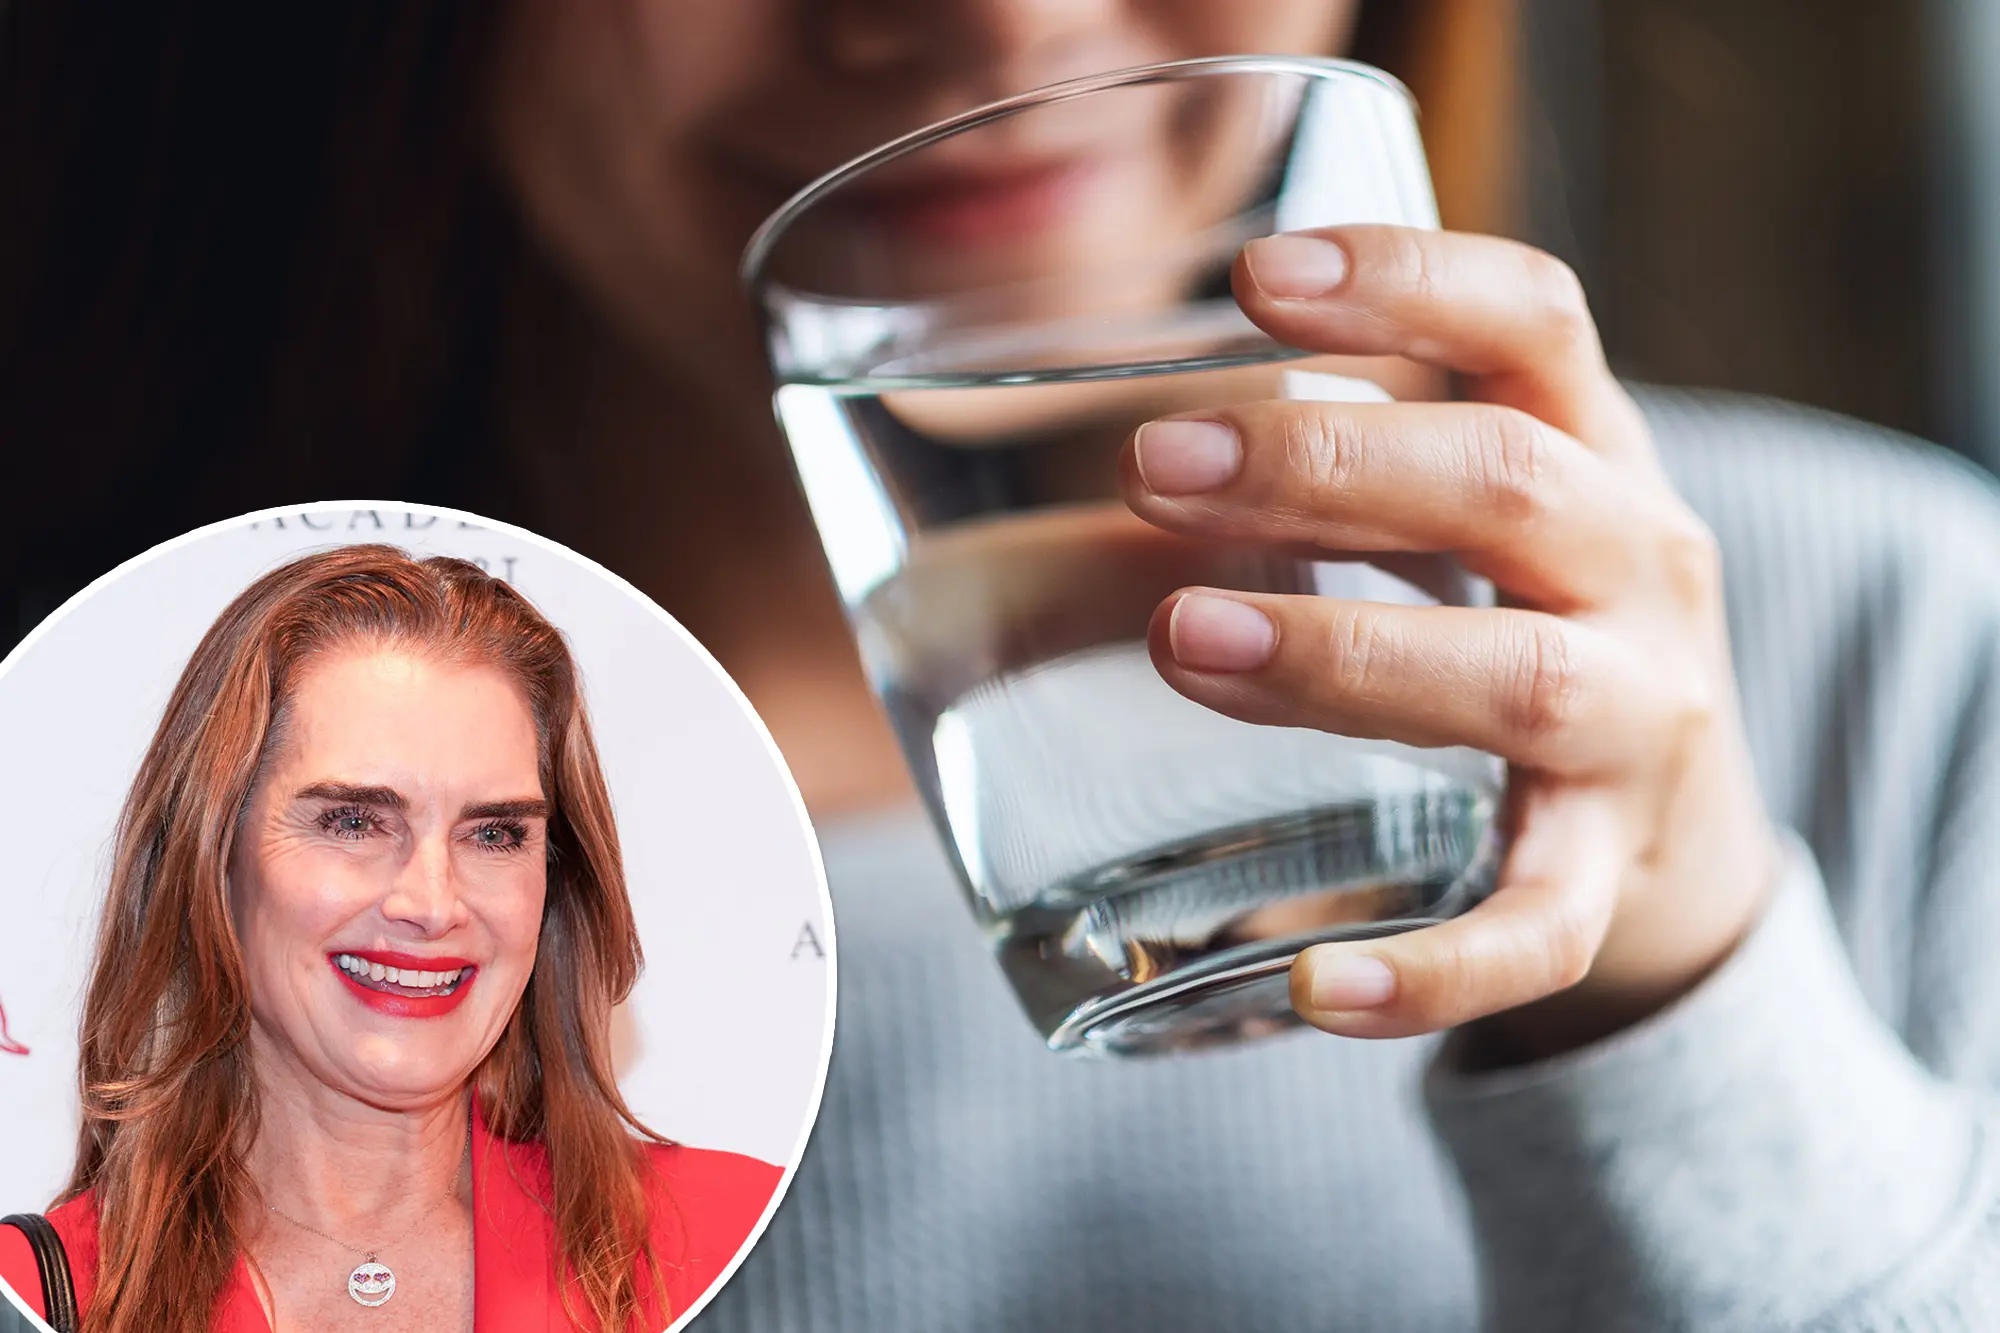 Brooke Shields says drinking excess water led to her seizure